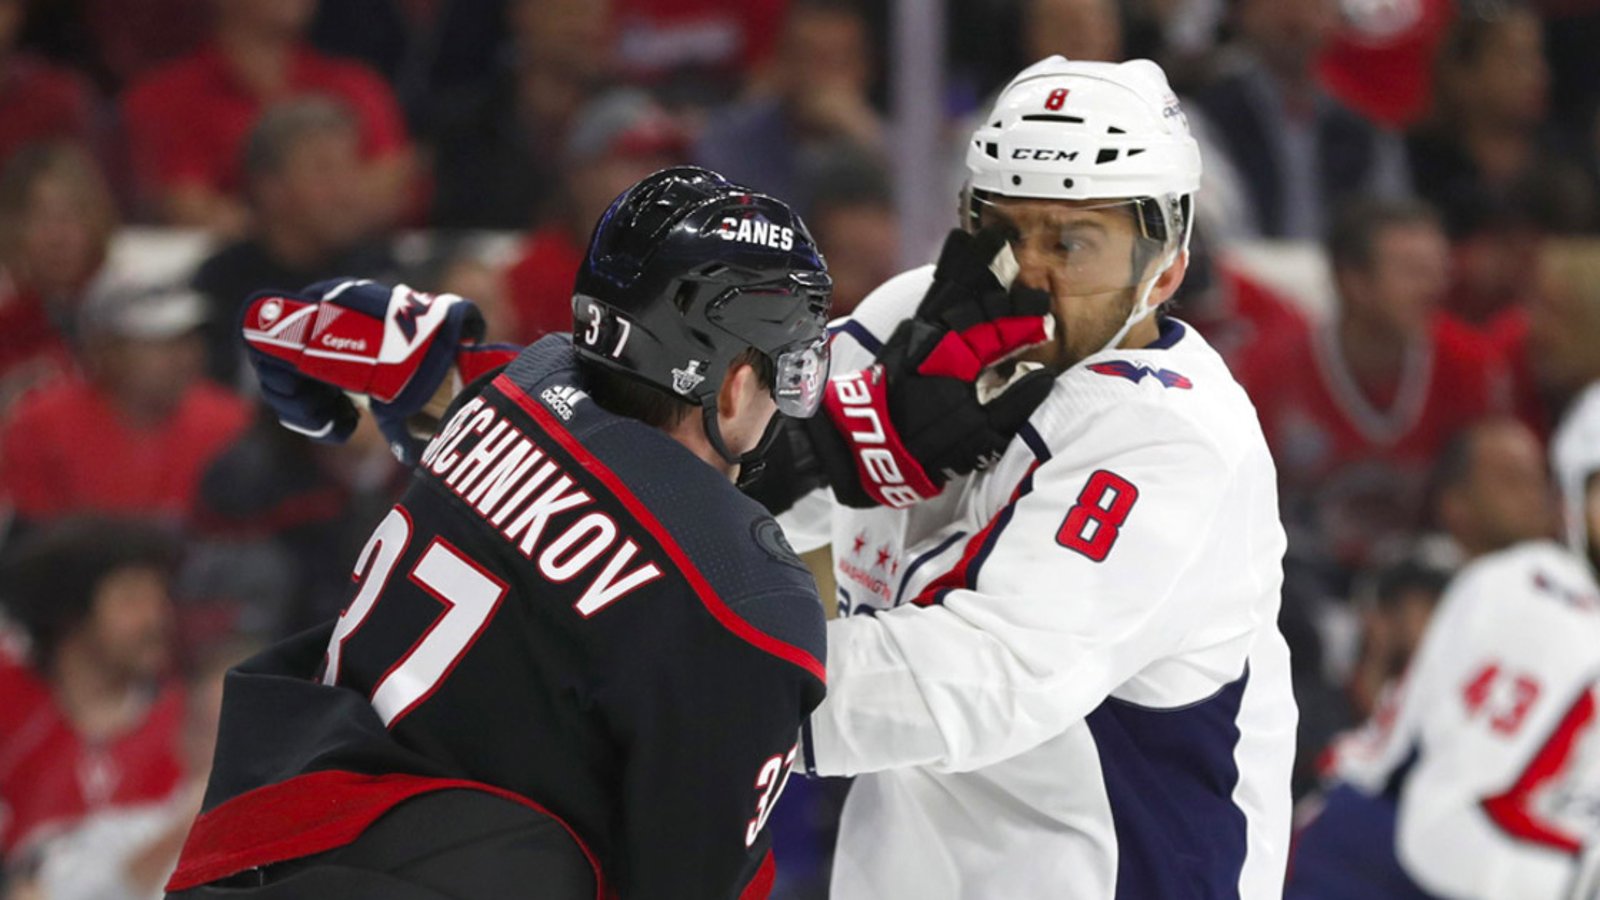 Rod Brind’Amour calls out Ovechkin after KOing rookie Svechnikov